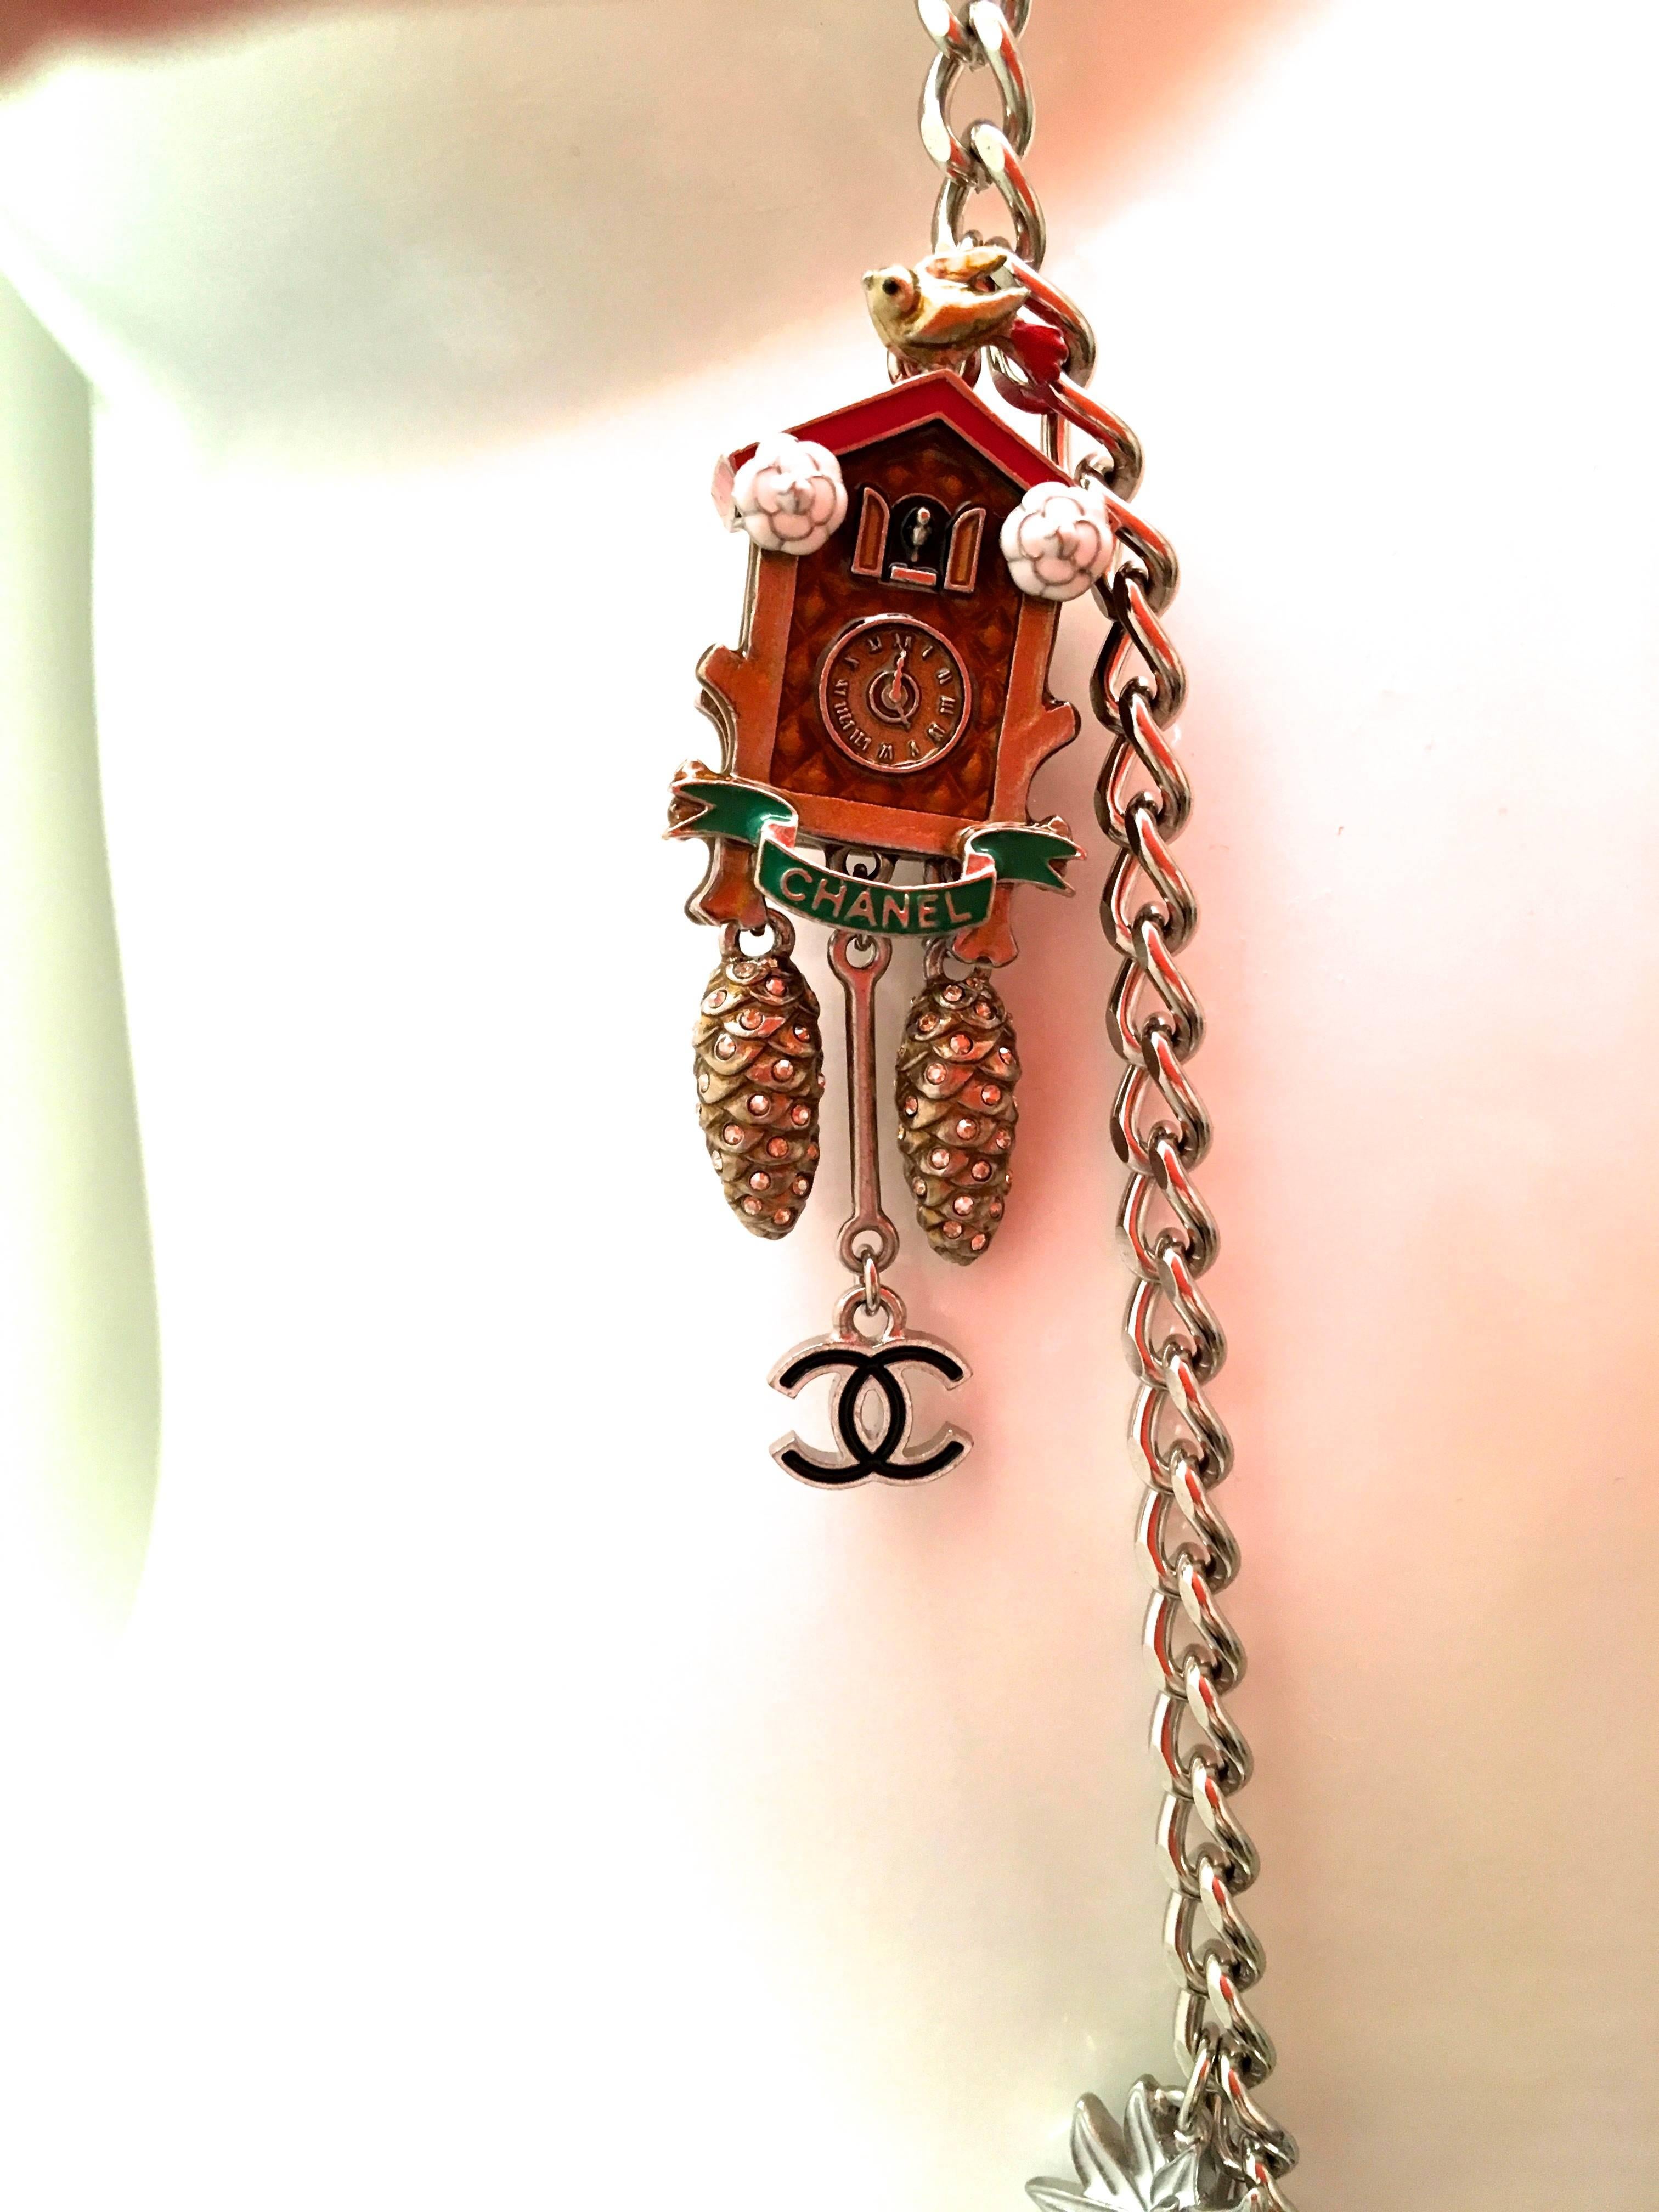 Chanel Salzburg Collection Cuckoo Necklace  In Excellent Condition For Sale In Boca Raton, FL